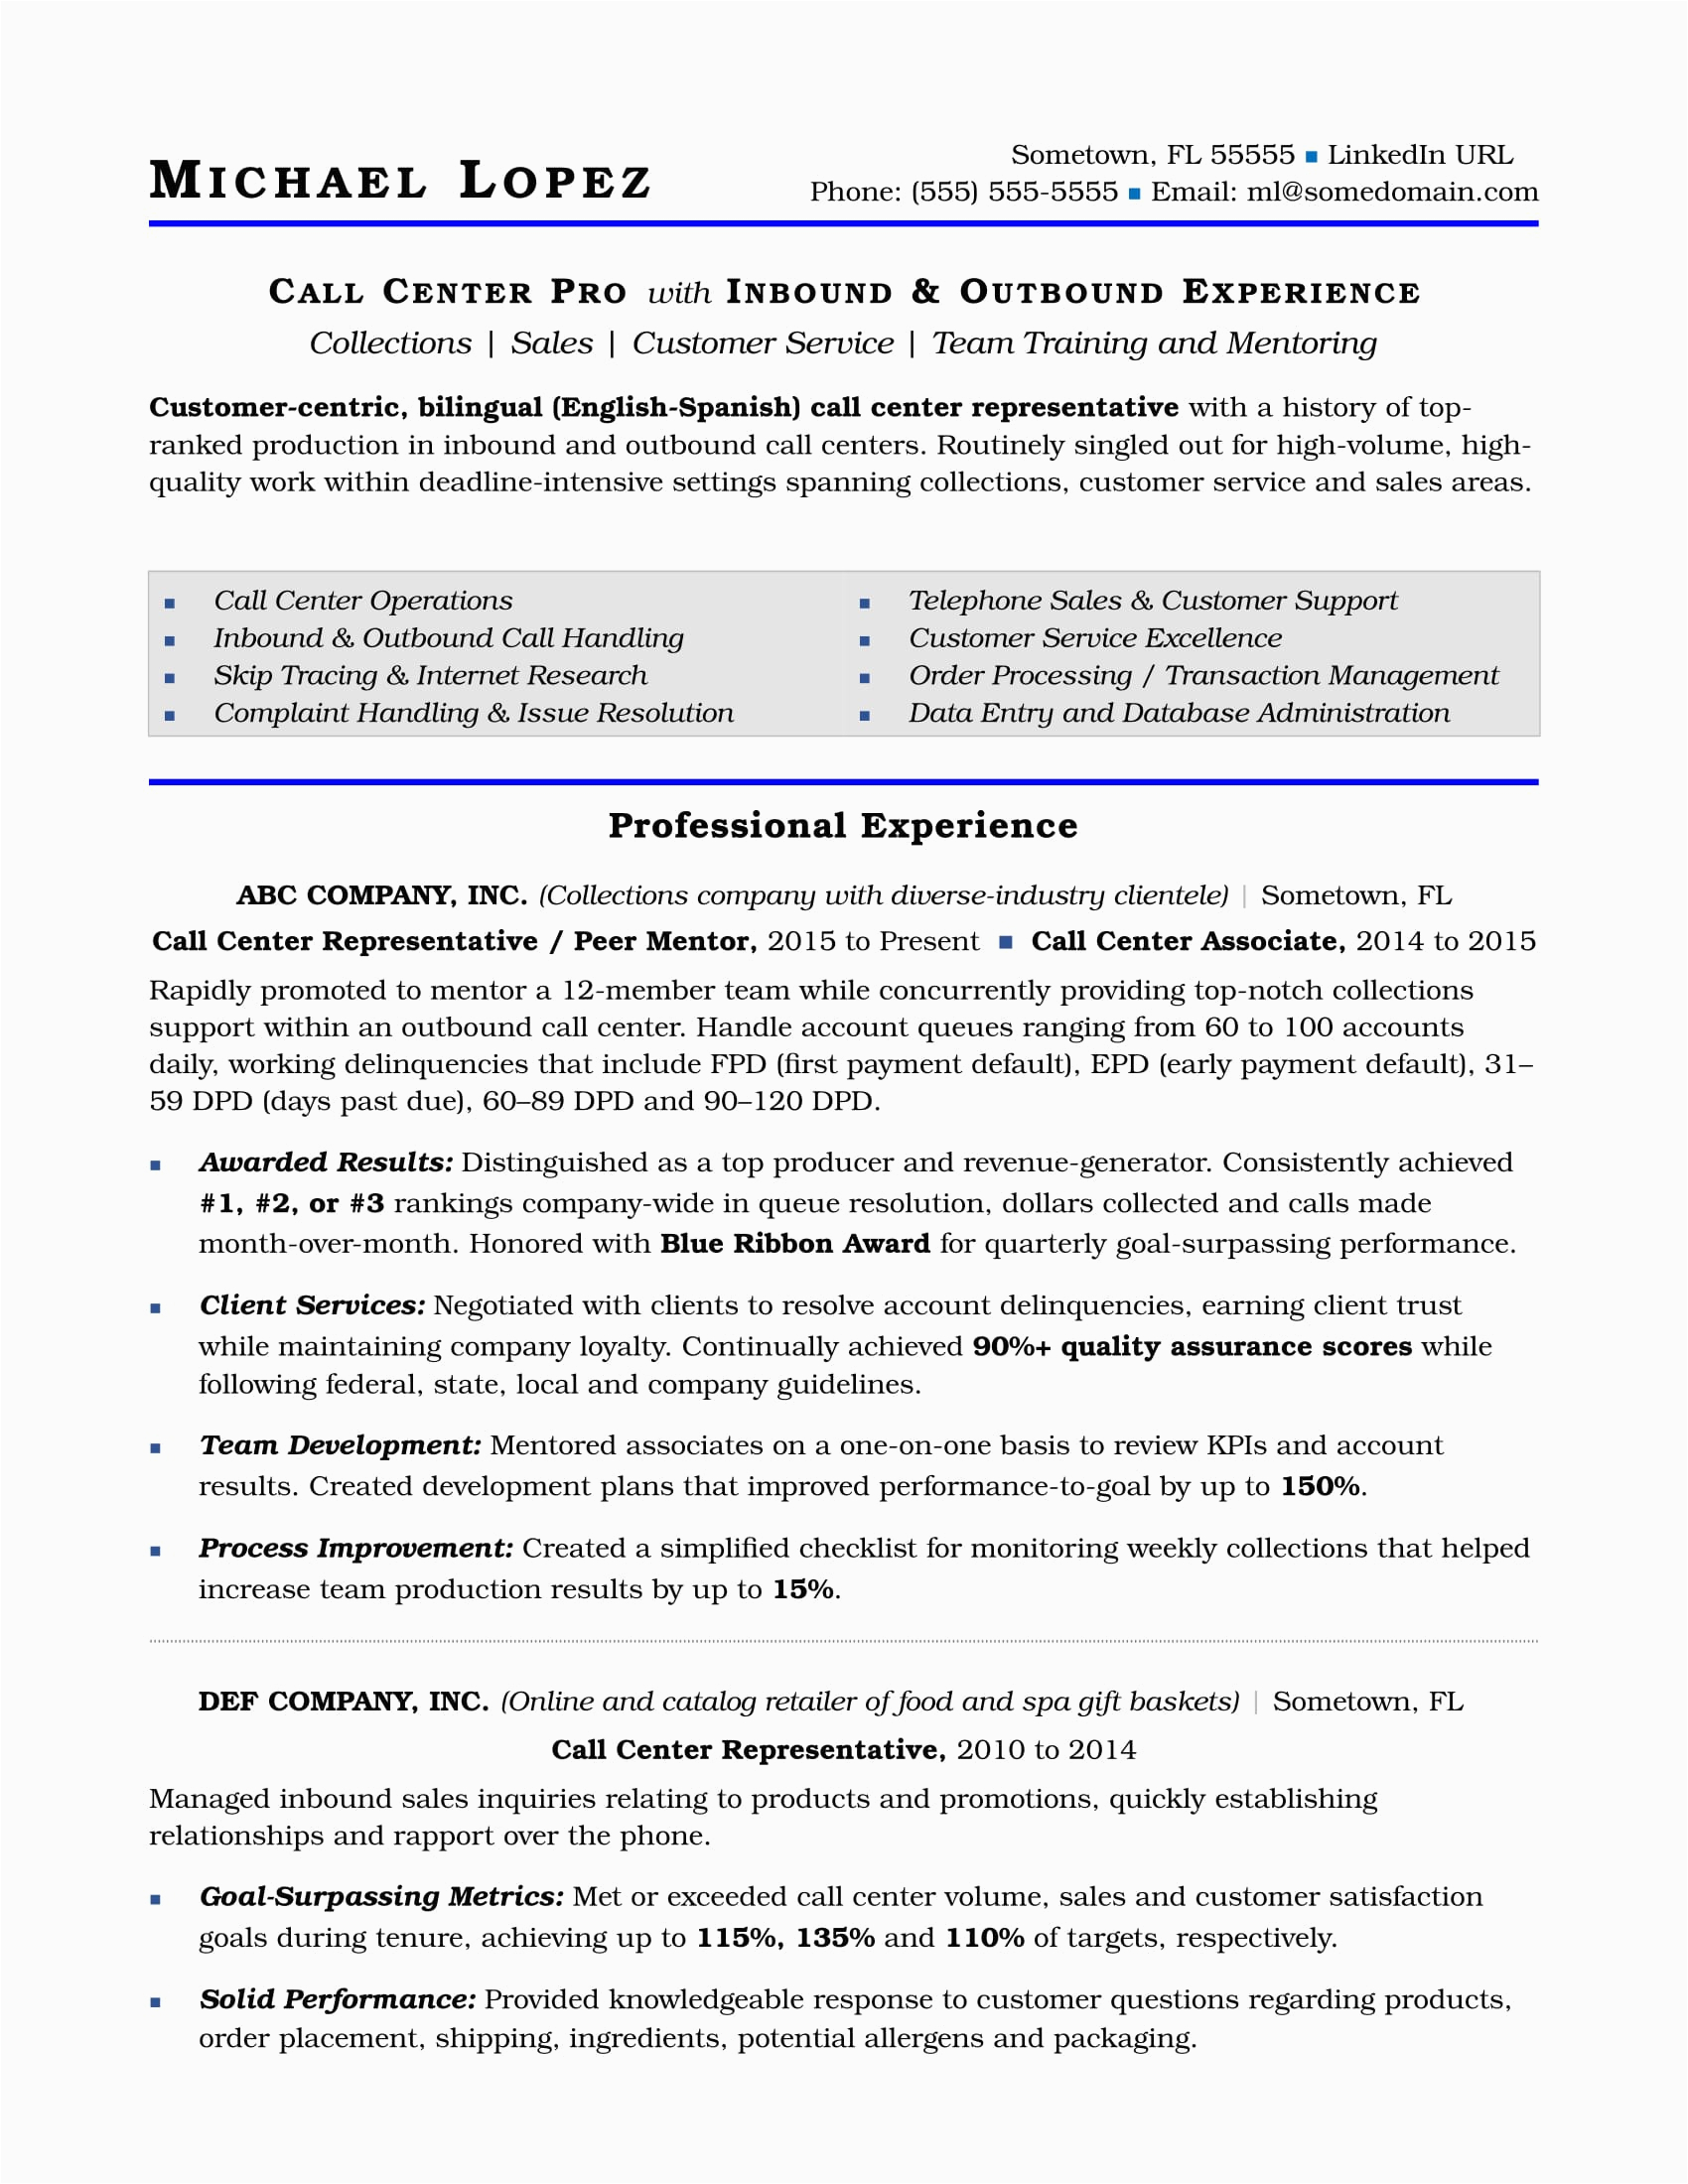 Resume Sample for Call Center with Experience Call Center Resume Sample